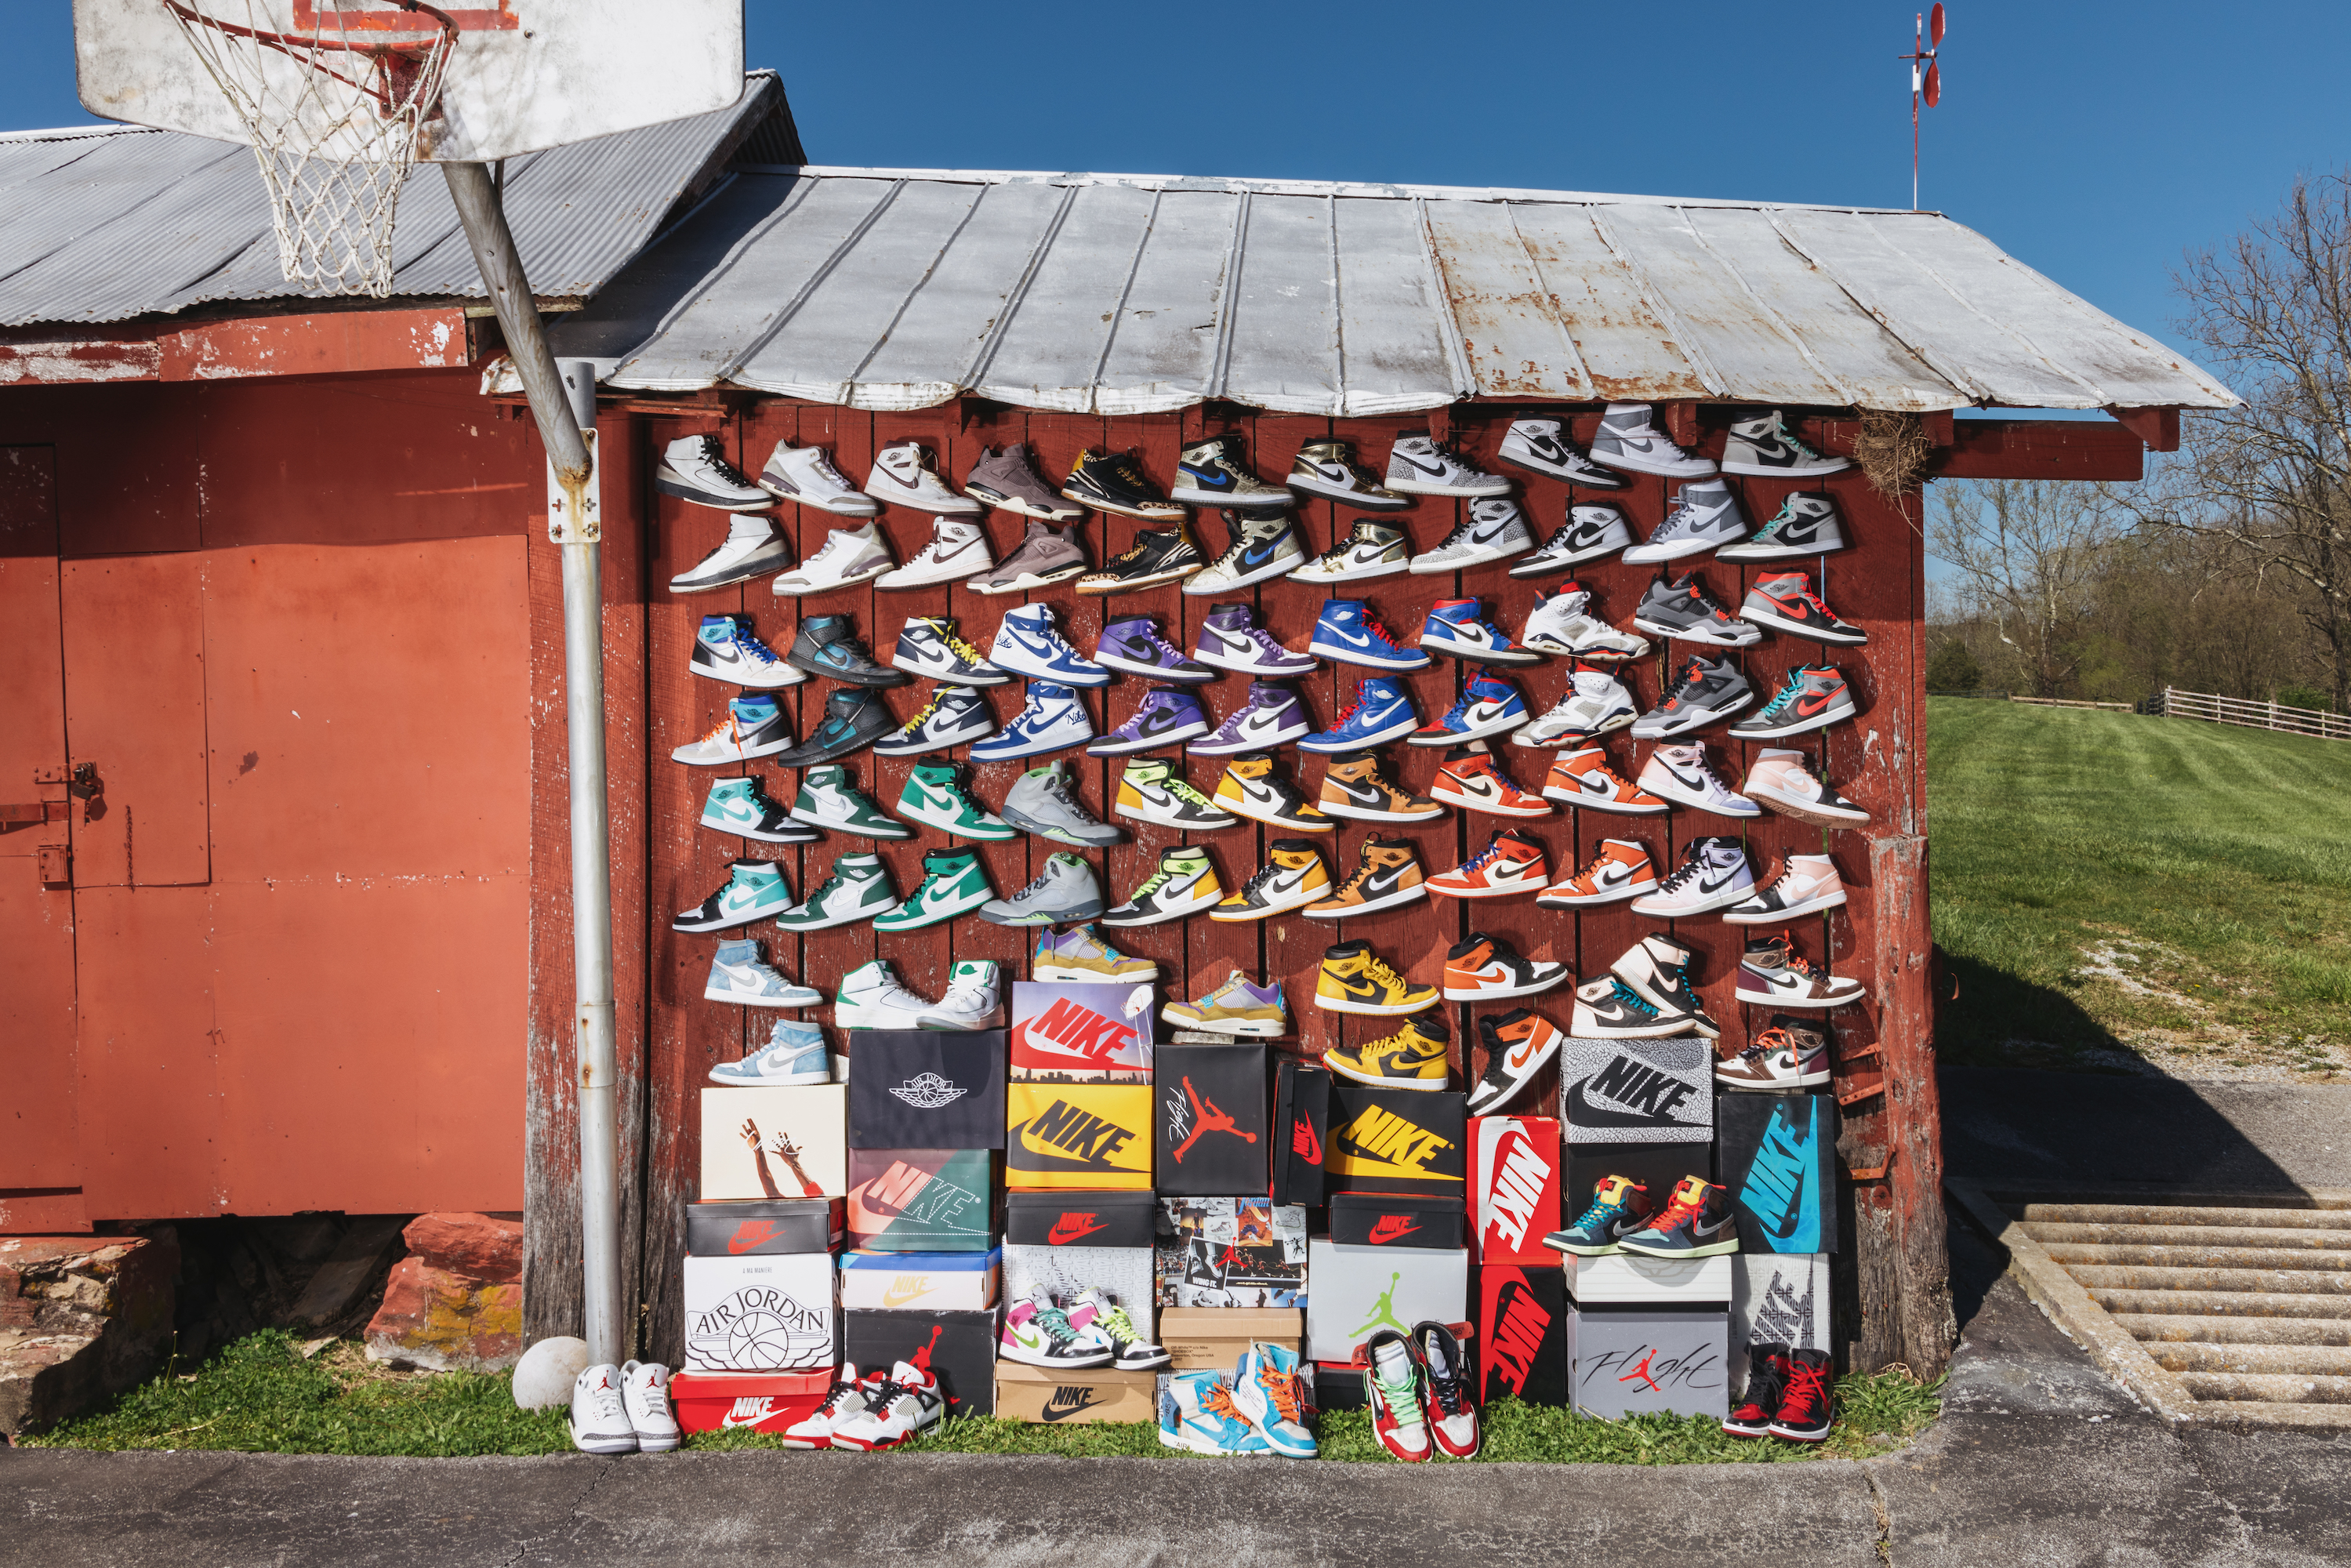 A collection of Air Jordans stacked against a red barn